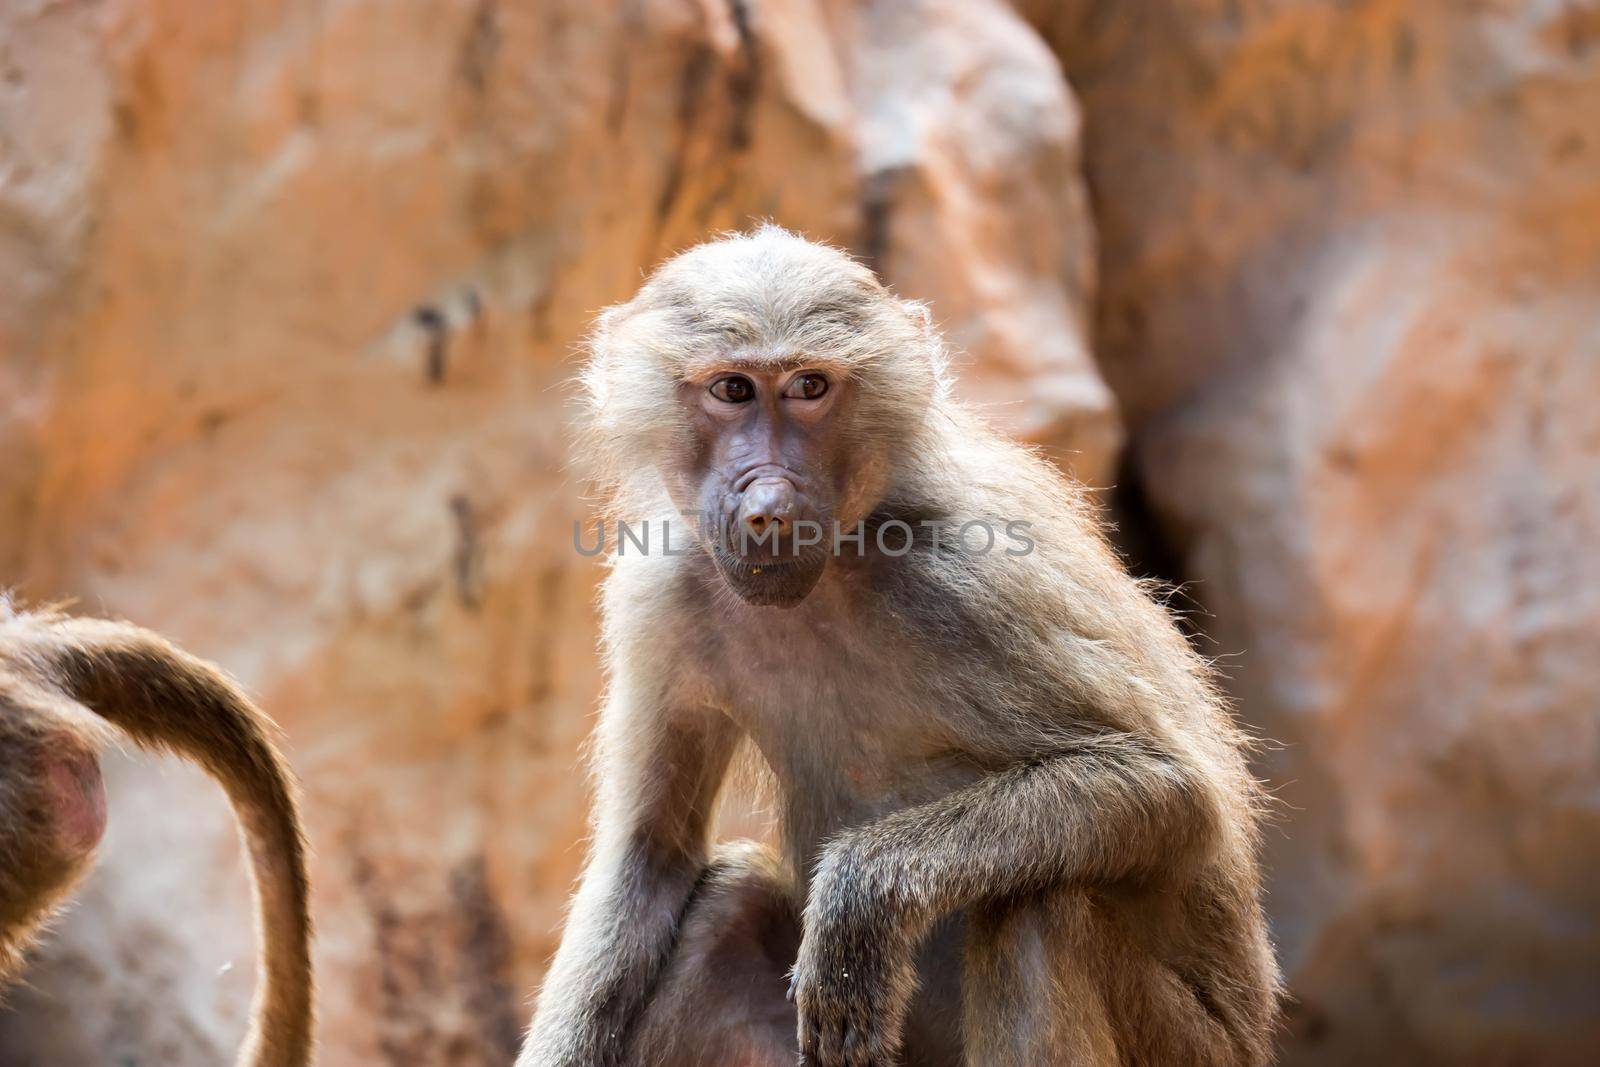 Hamadryas baboon sitting and observing by billroque